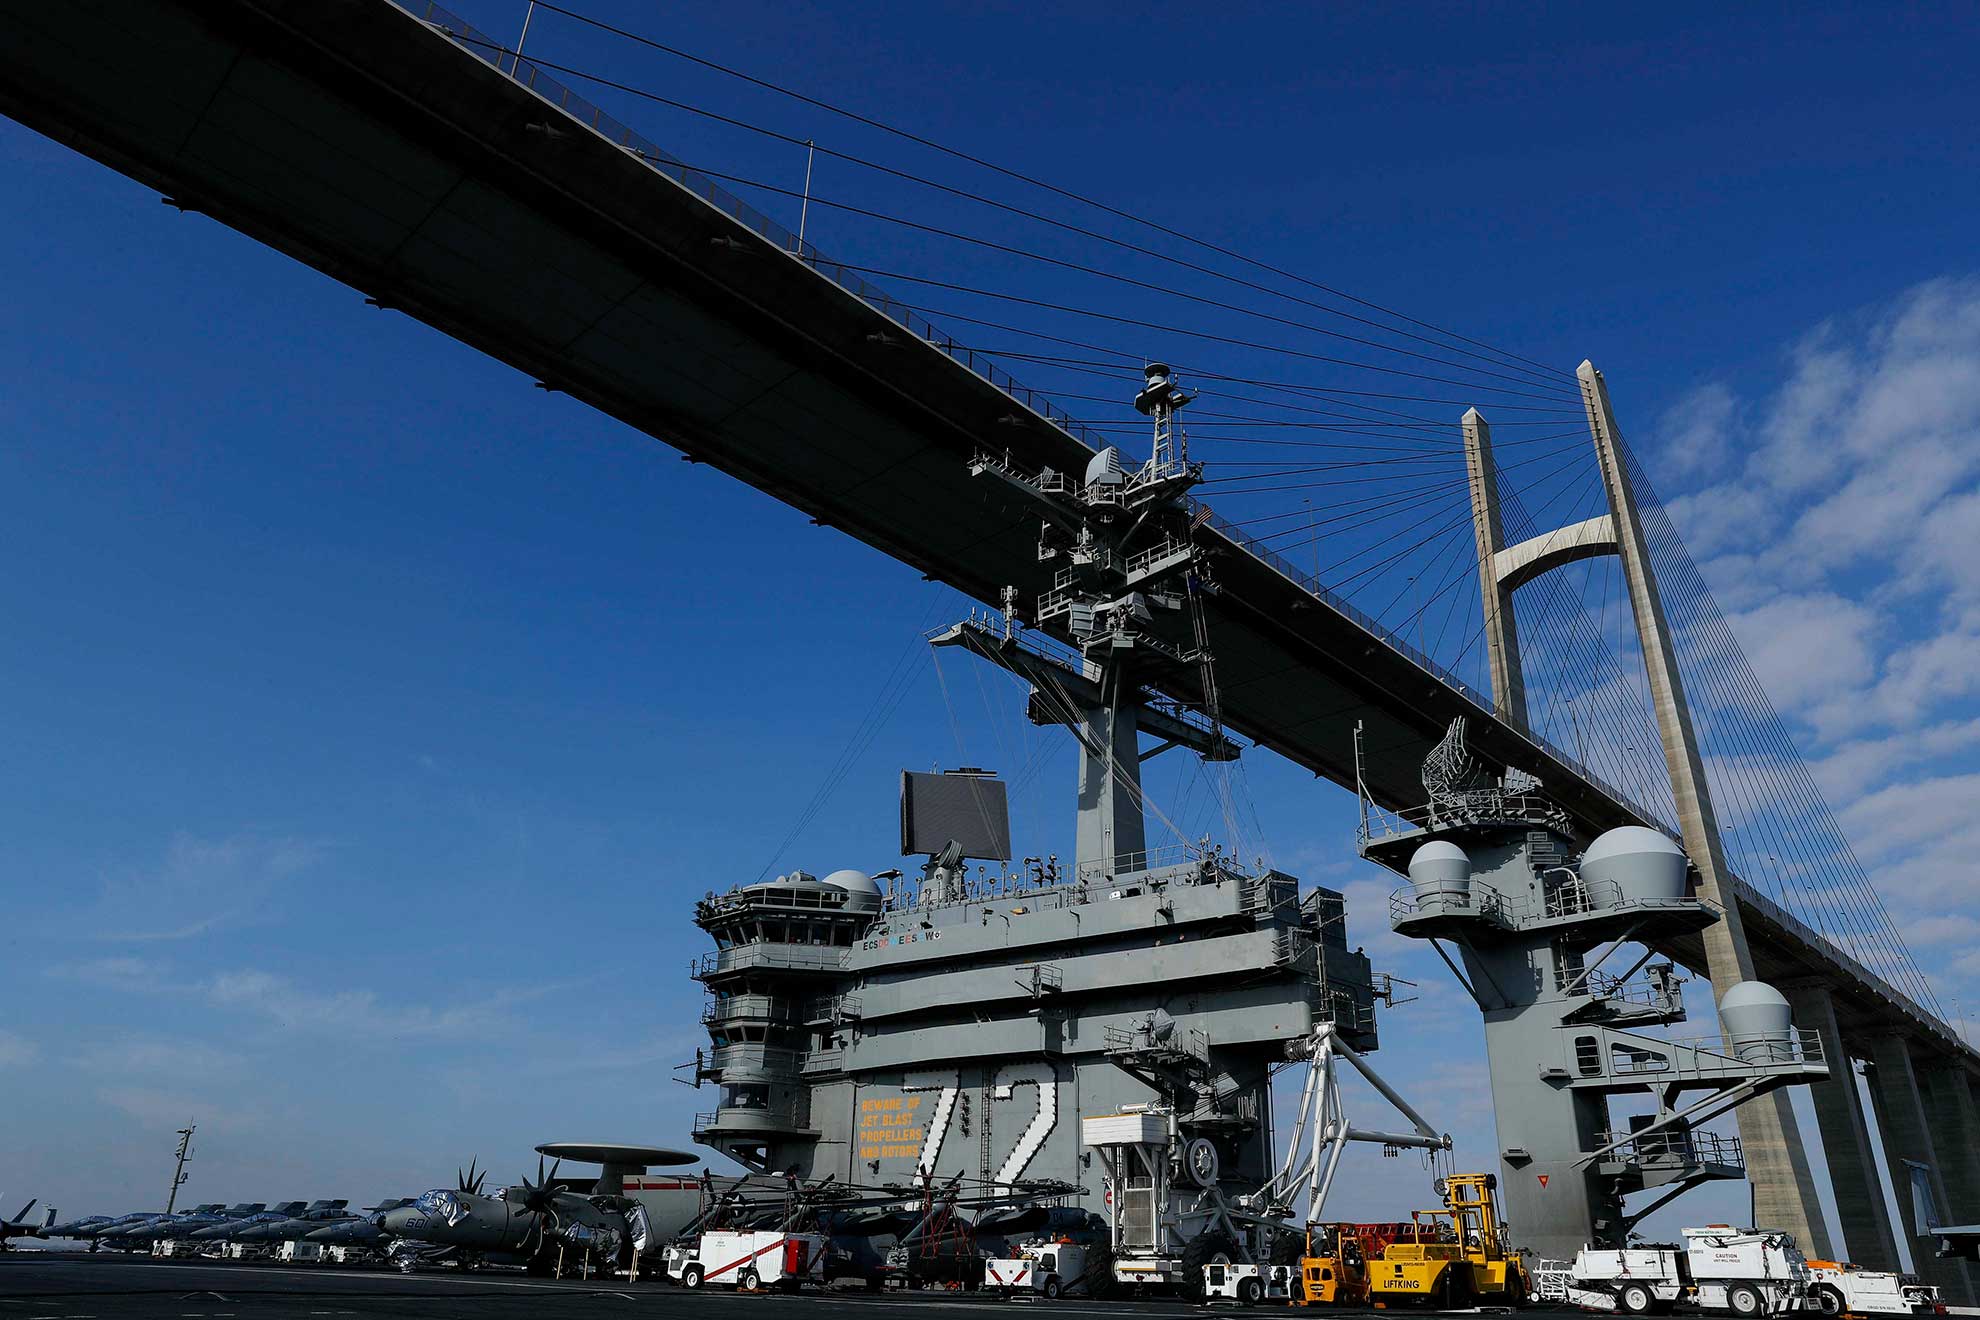 Suez Canal (May 9, 2019) The Nimitz-class aircraft carrier USS Abraham Lincoln (CVN72) sails under the Peace Bridge while transiting the Suez Canal. The Abraham Lincoln Carrier Strike Group (ABECSG) is deployed to U.S. Central Command area of responsibility in order to defend American forces and interests in the region. With Abraham Lincoln as the flagship, deployed strike group assets include staffs, ships and aircraft of Carrier Strike Group 12 (CSG 12), Destroyer Squadron 2 (DESRON 2), USS Leyte Gulf (CG 55) and Carrier Air Wing 7 (CVW 7); as well as the Spanish navy lvaro de Bazan-class frigate ESPS Mendez Nñez (F 104) -- U.S. Navy photo by MCS 1st Class Brian M. Wilbur. -